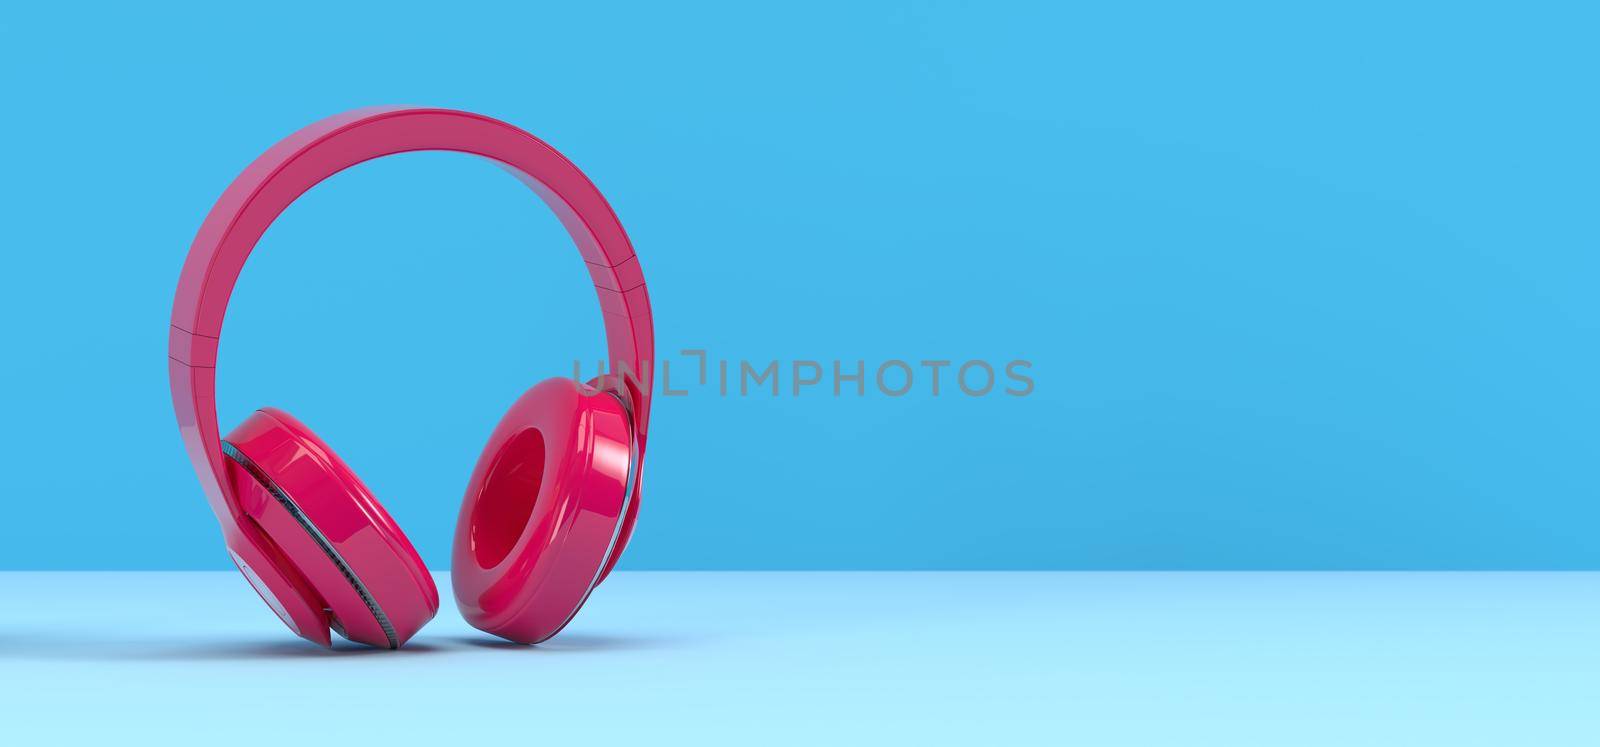 Pink PODCAST Microphone on blue background. Entertainment and online video conference concept. 3D illustration rendering